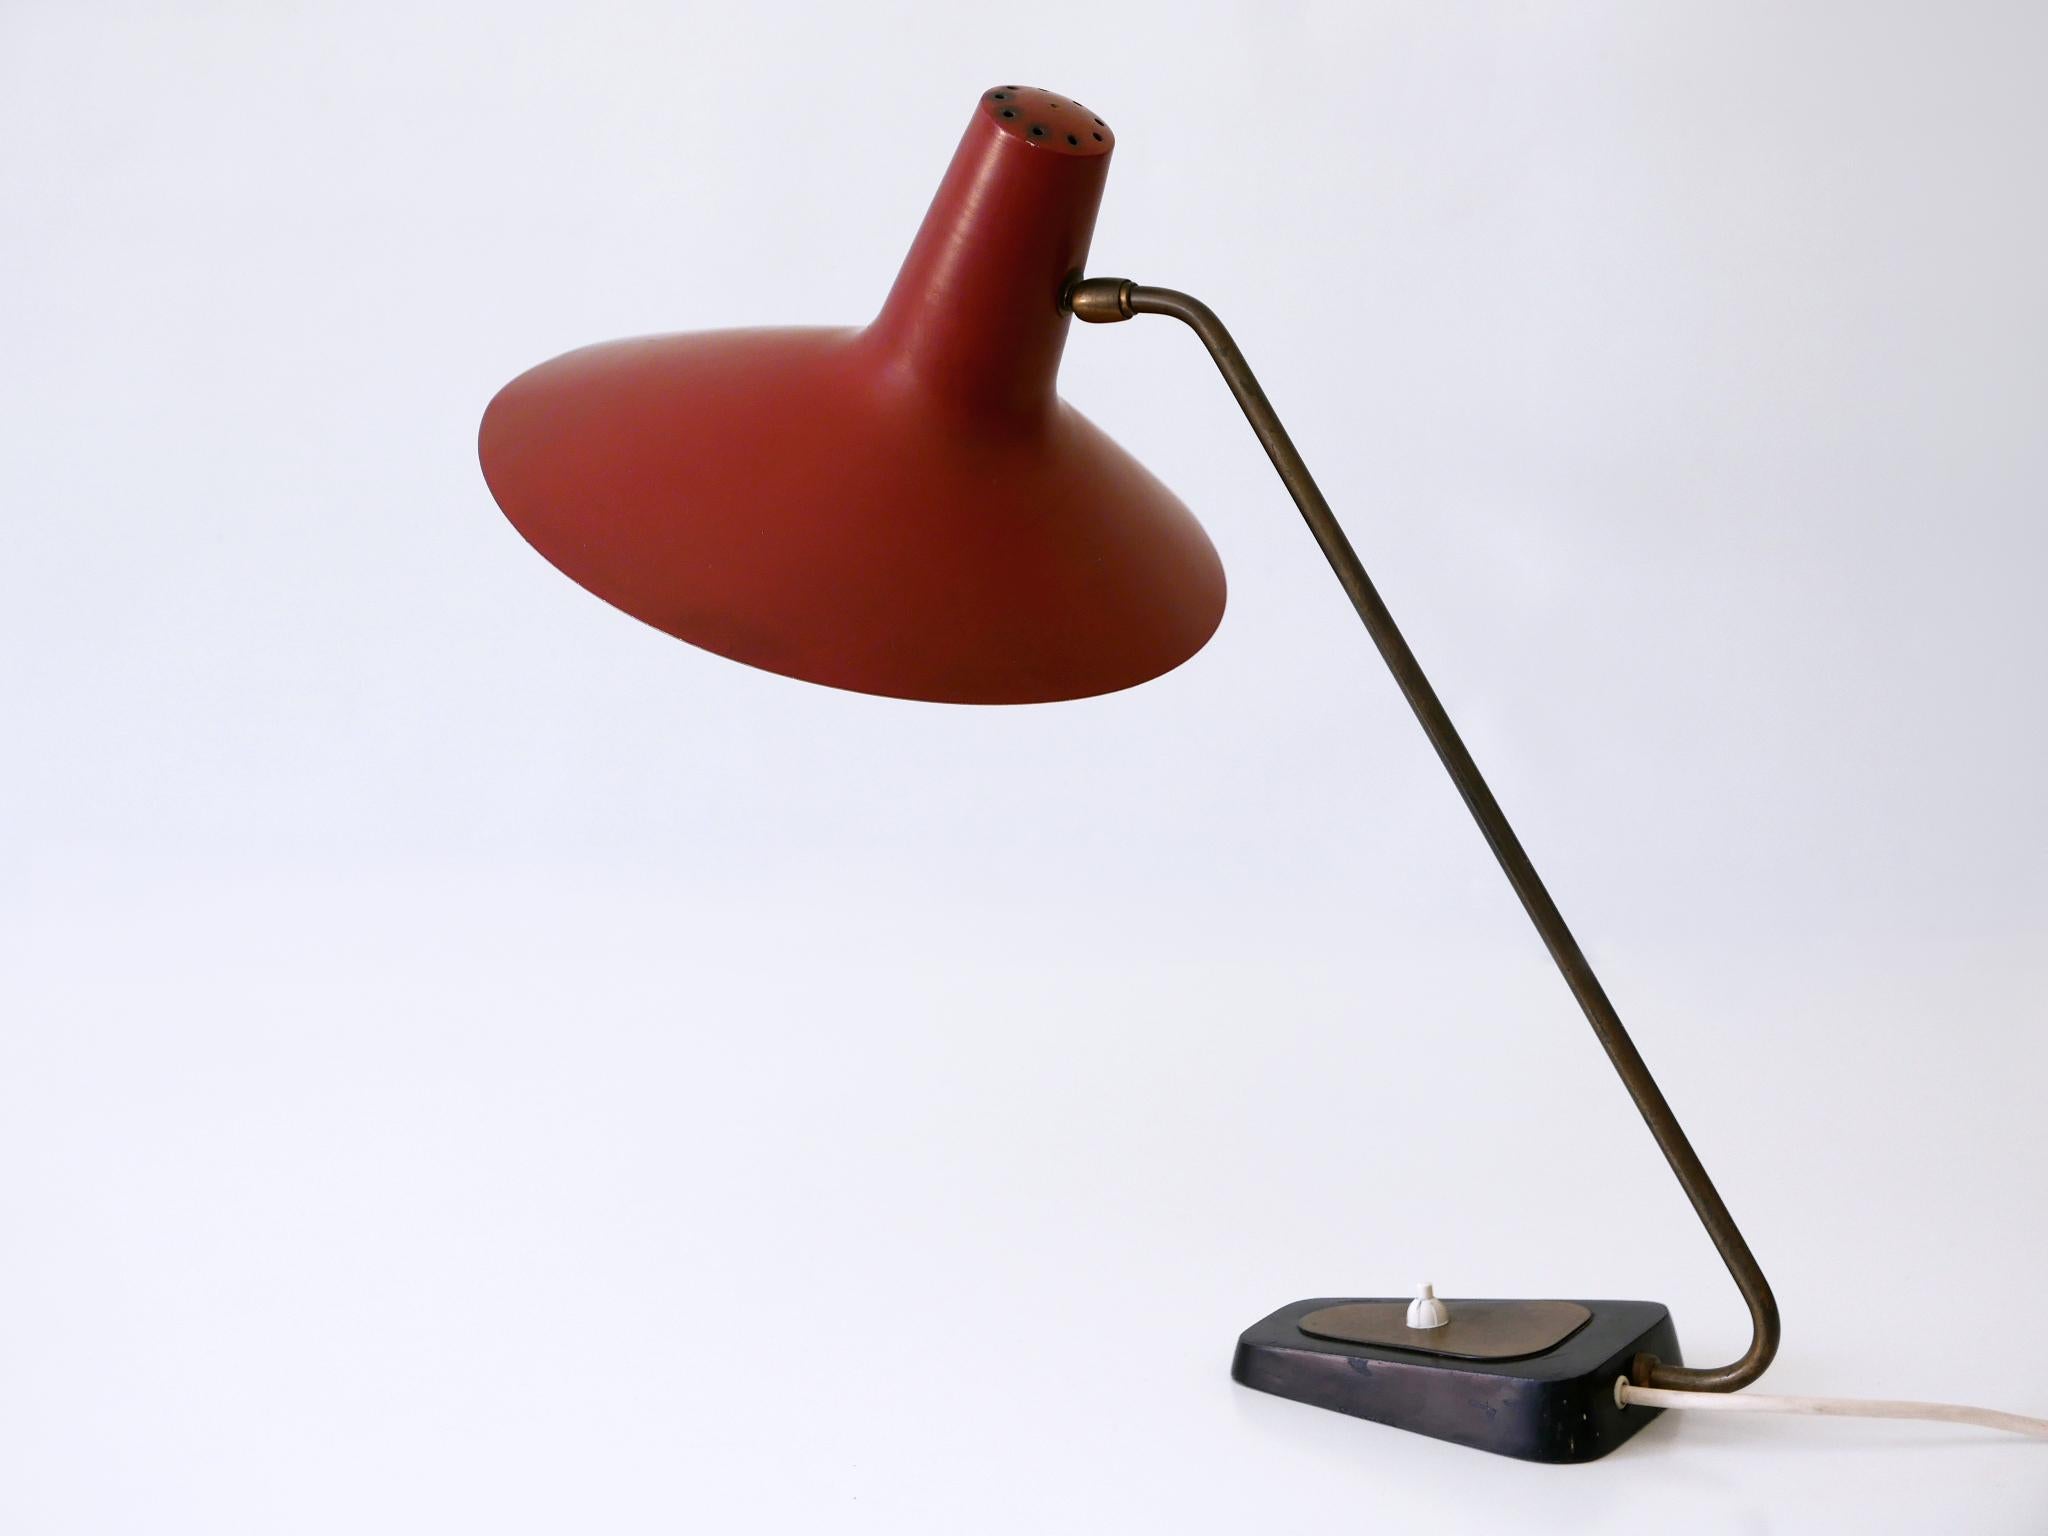 Exceptional Mid-Century Modern Table Lamp by Gebrüder Cosack Germany 1950s For Sale 11